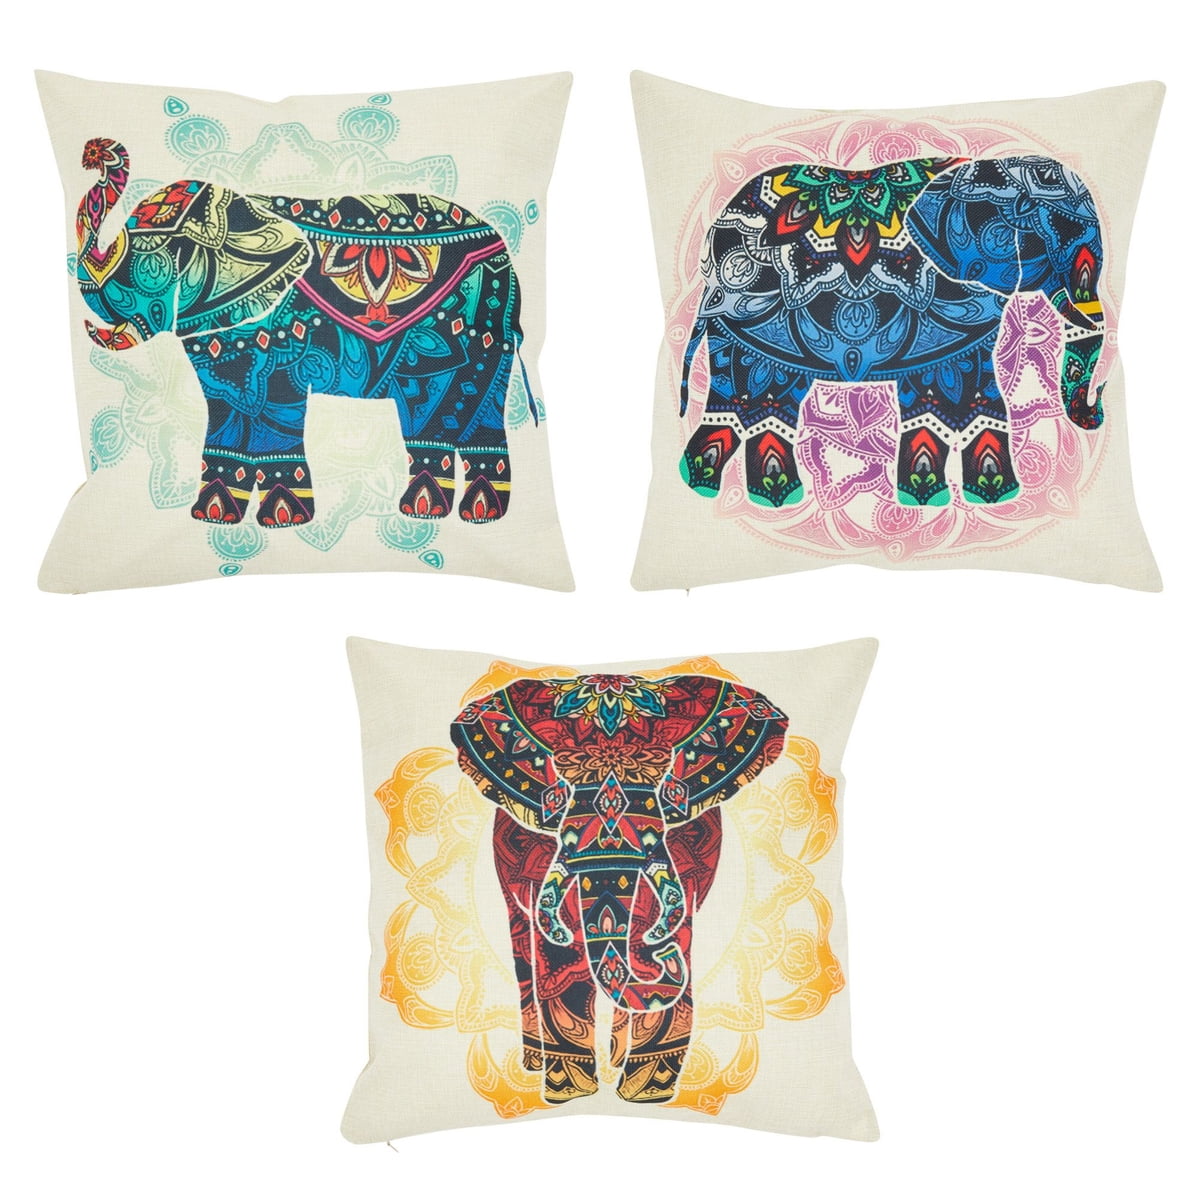 Creativemotions Indian Elephant in Mandala Ornament Throw Pillow Multicolor 18x18